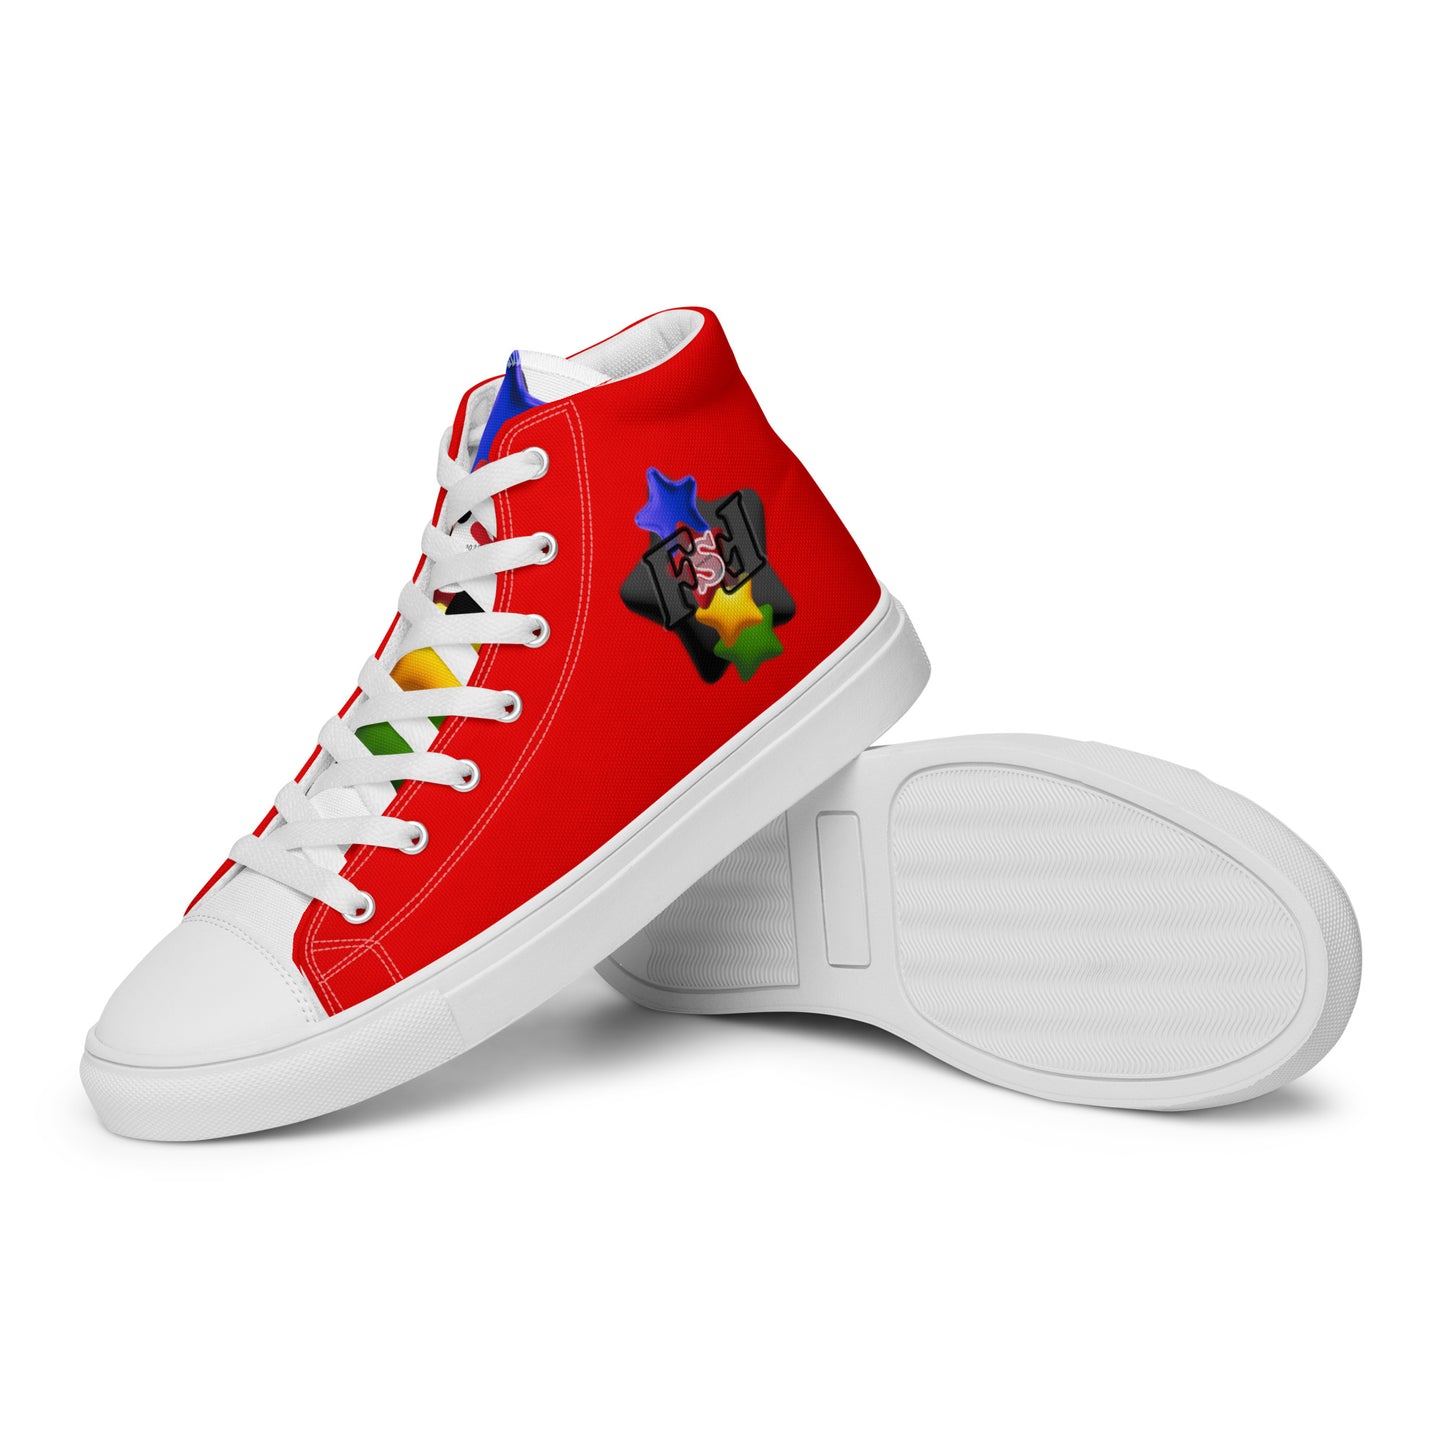 Women’s high top canvas shoes - FSF Stacked 'Black Star' Red